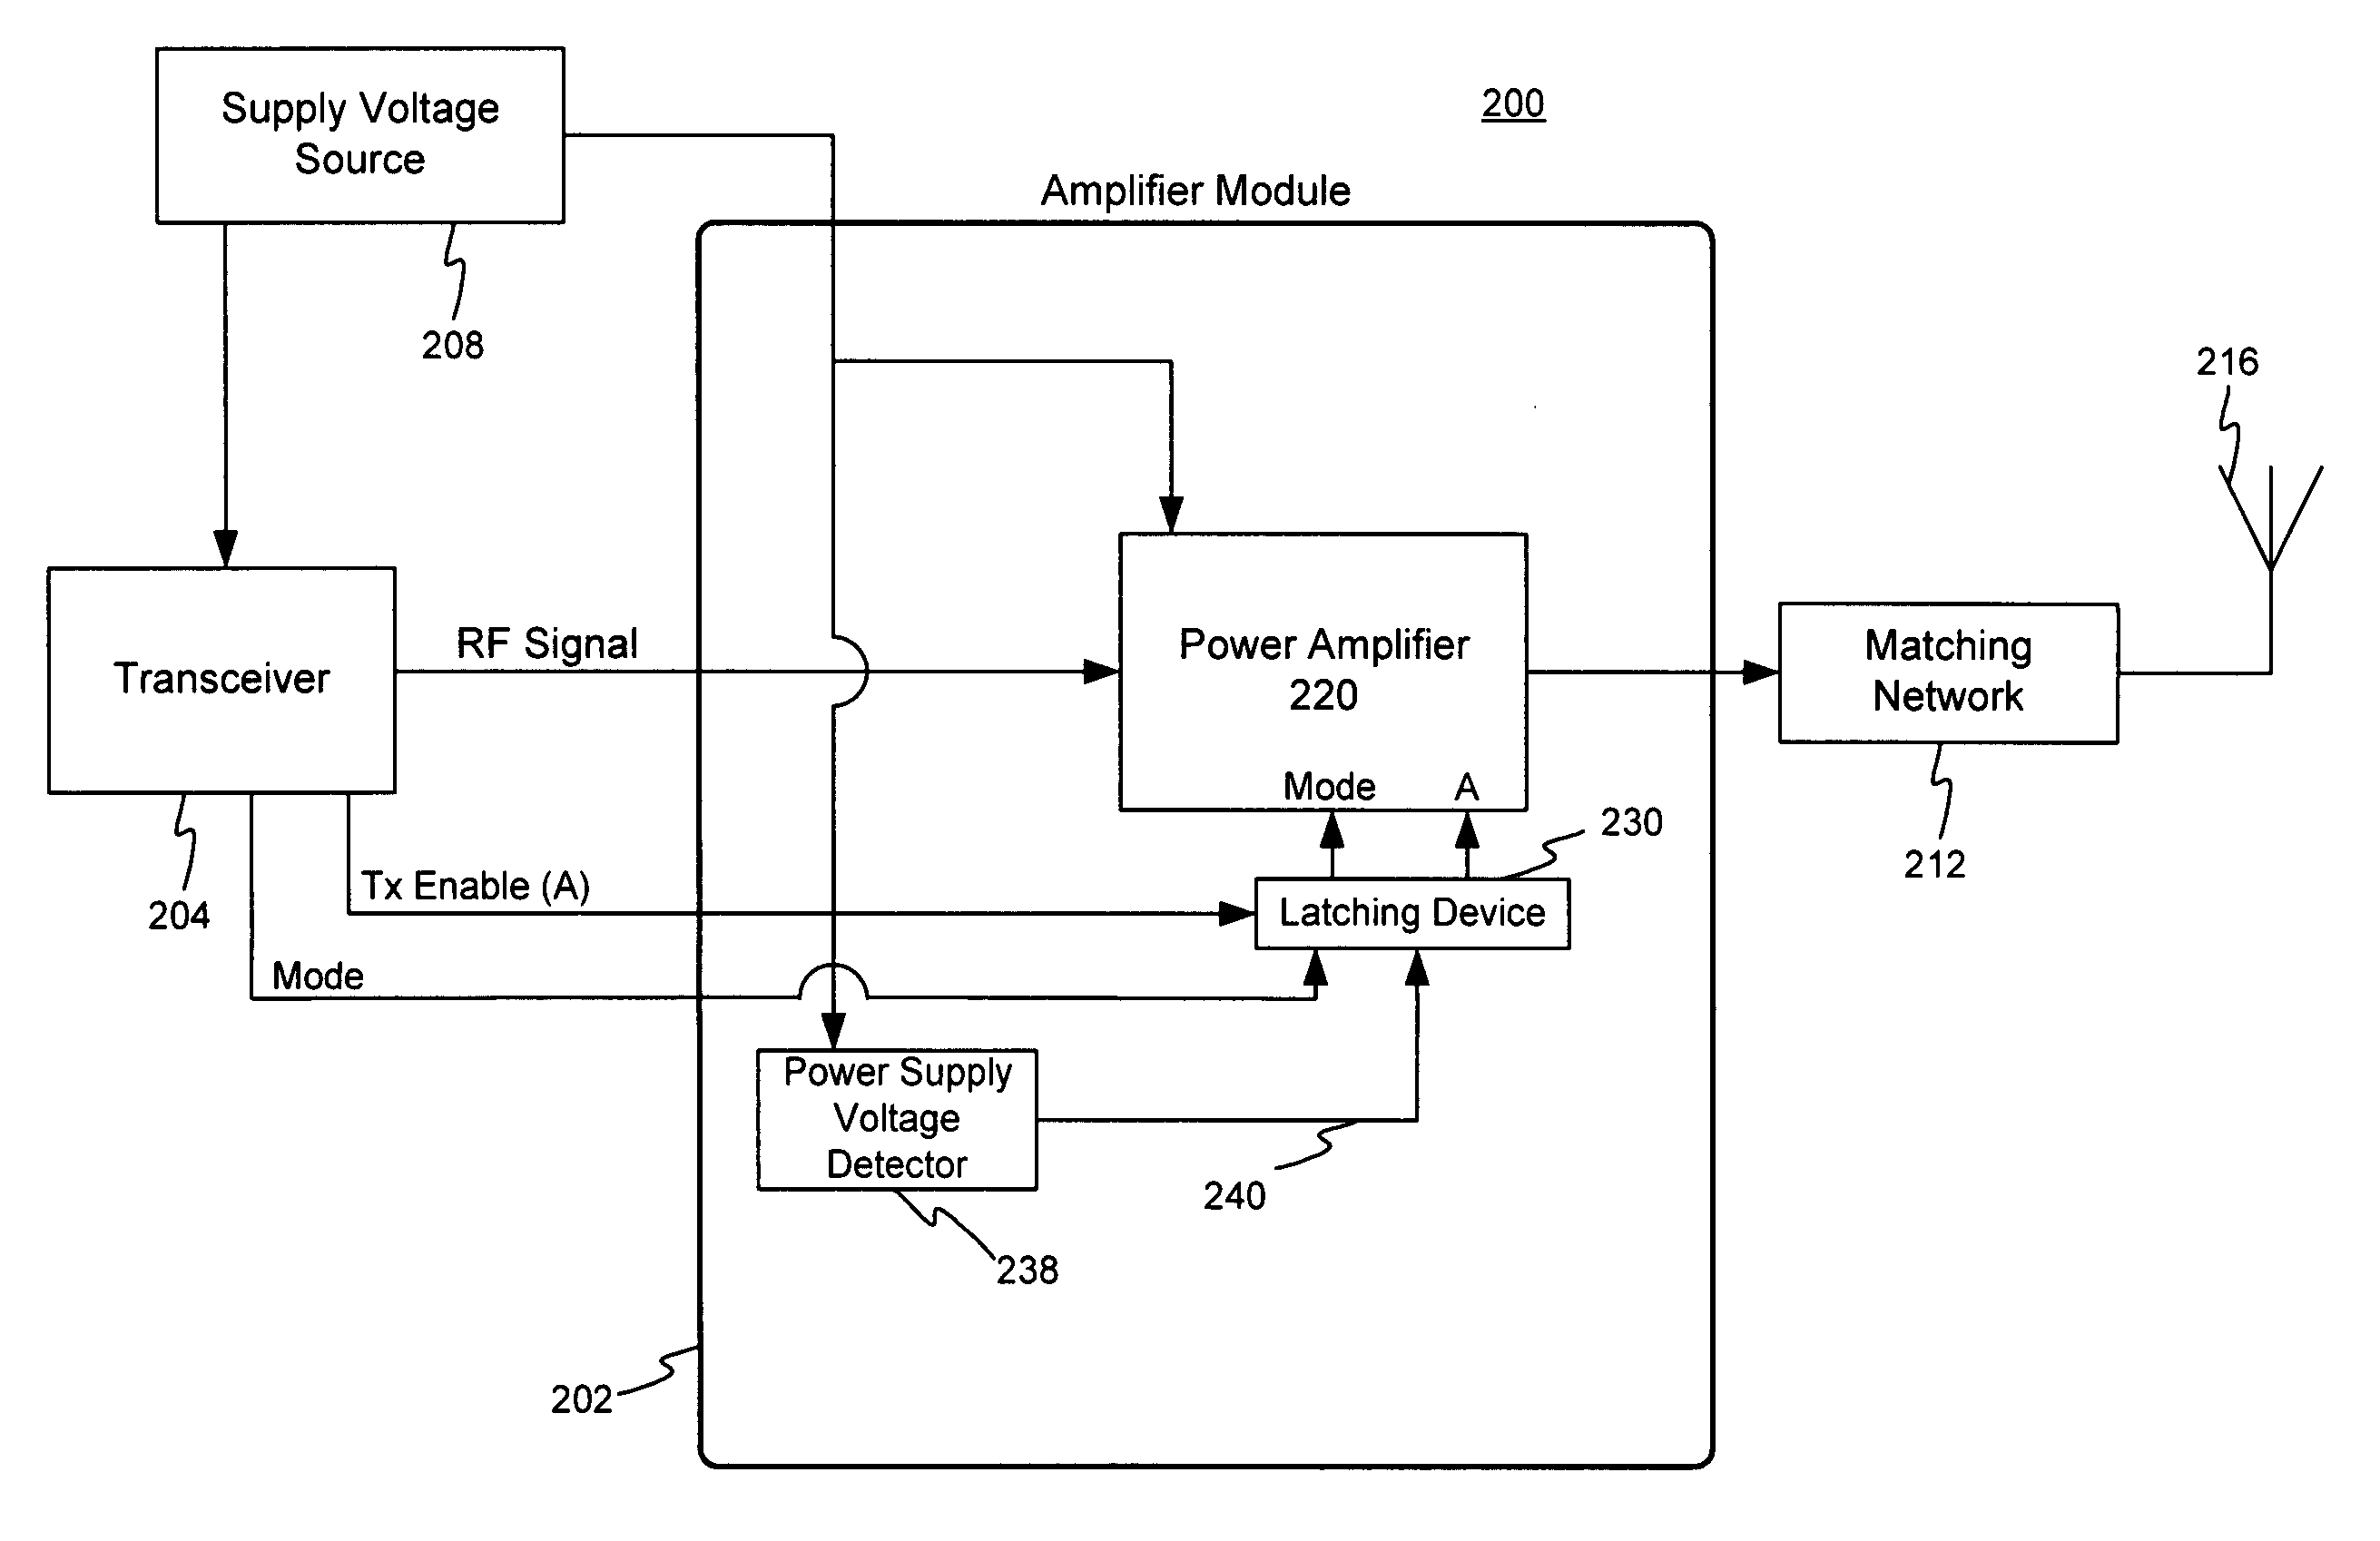 Amplifier gain adjustment in response to reduced supply voltage